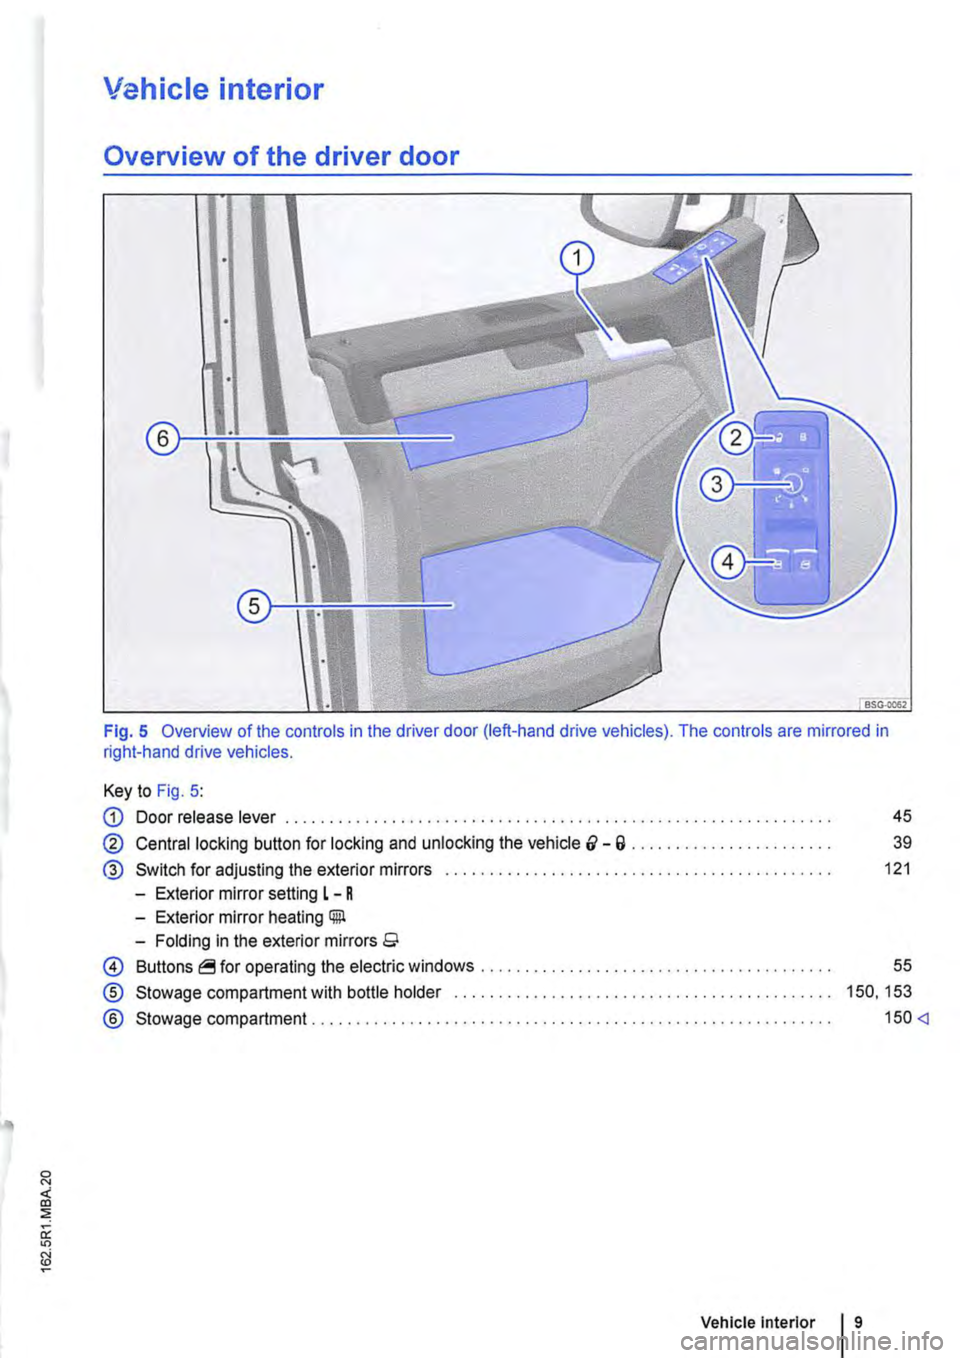 VOLKSWAGEN TRANSPORTER 2013  Owners Manual Vehicle interior 
Overview of the driver door 
Fig. 5 Overview of the controls in the driver door (left-hand drive vehicles). The controls are mirrored in right-hand drive vehicles. 
Key to Fig. 5: 
G